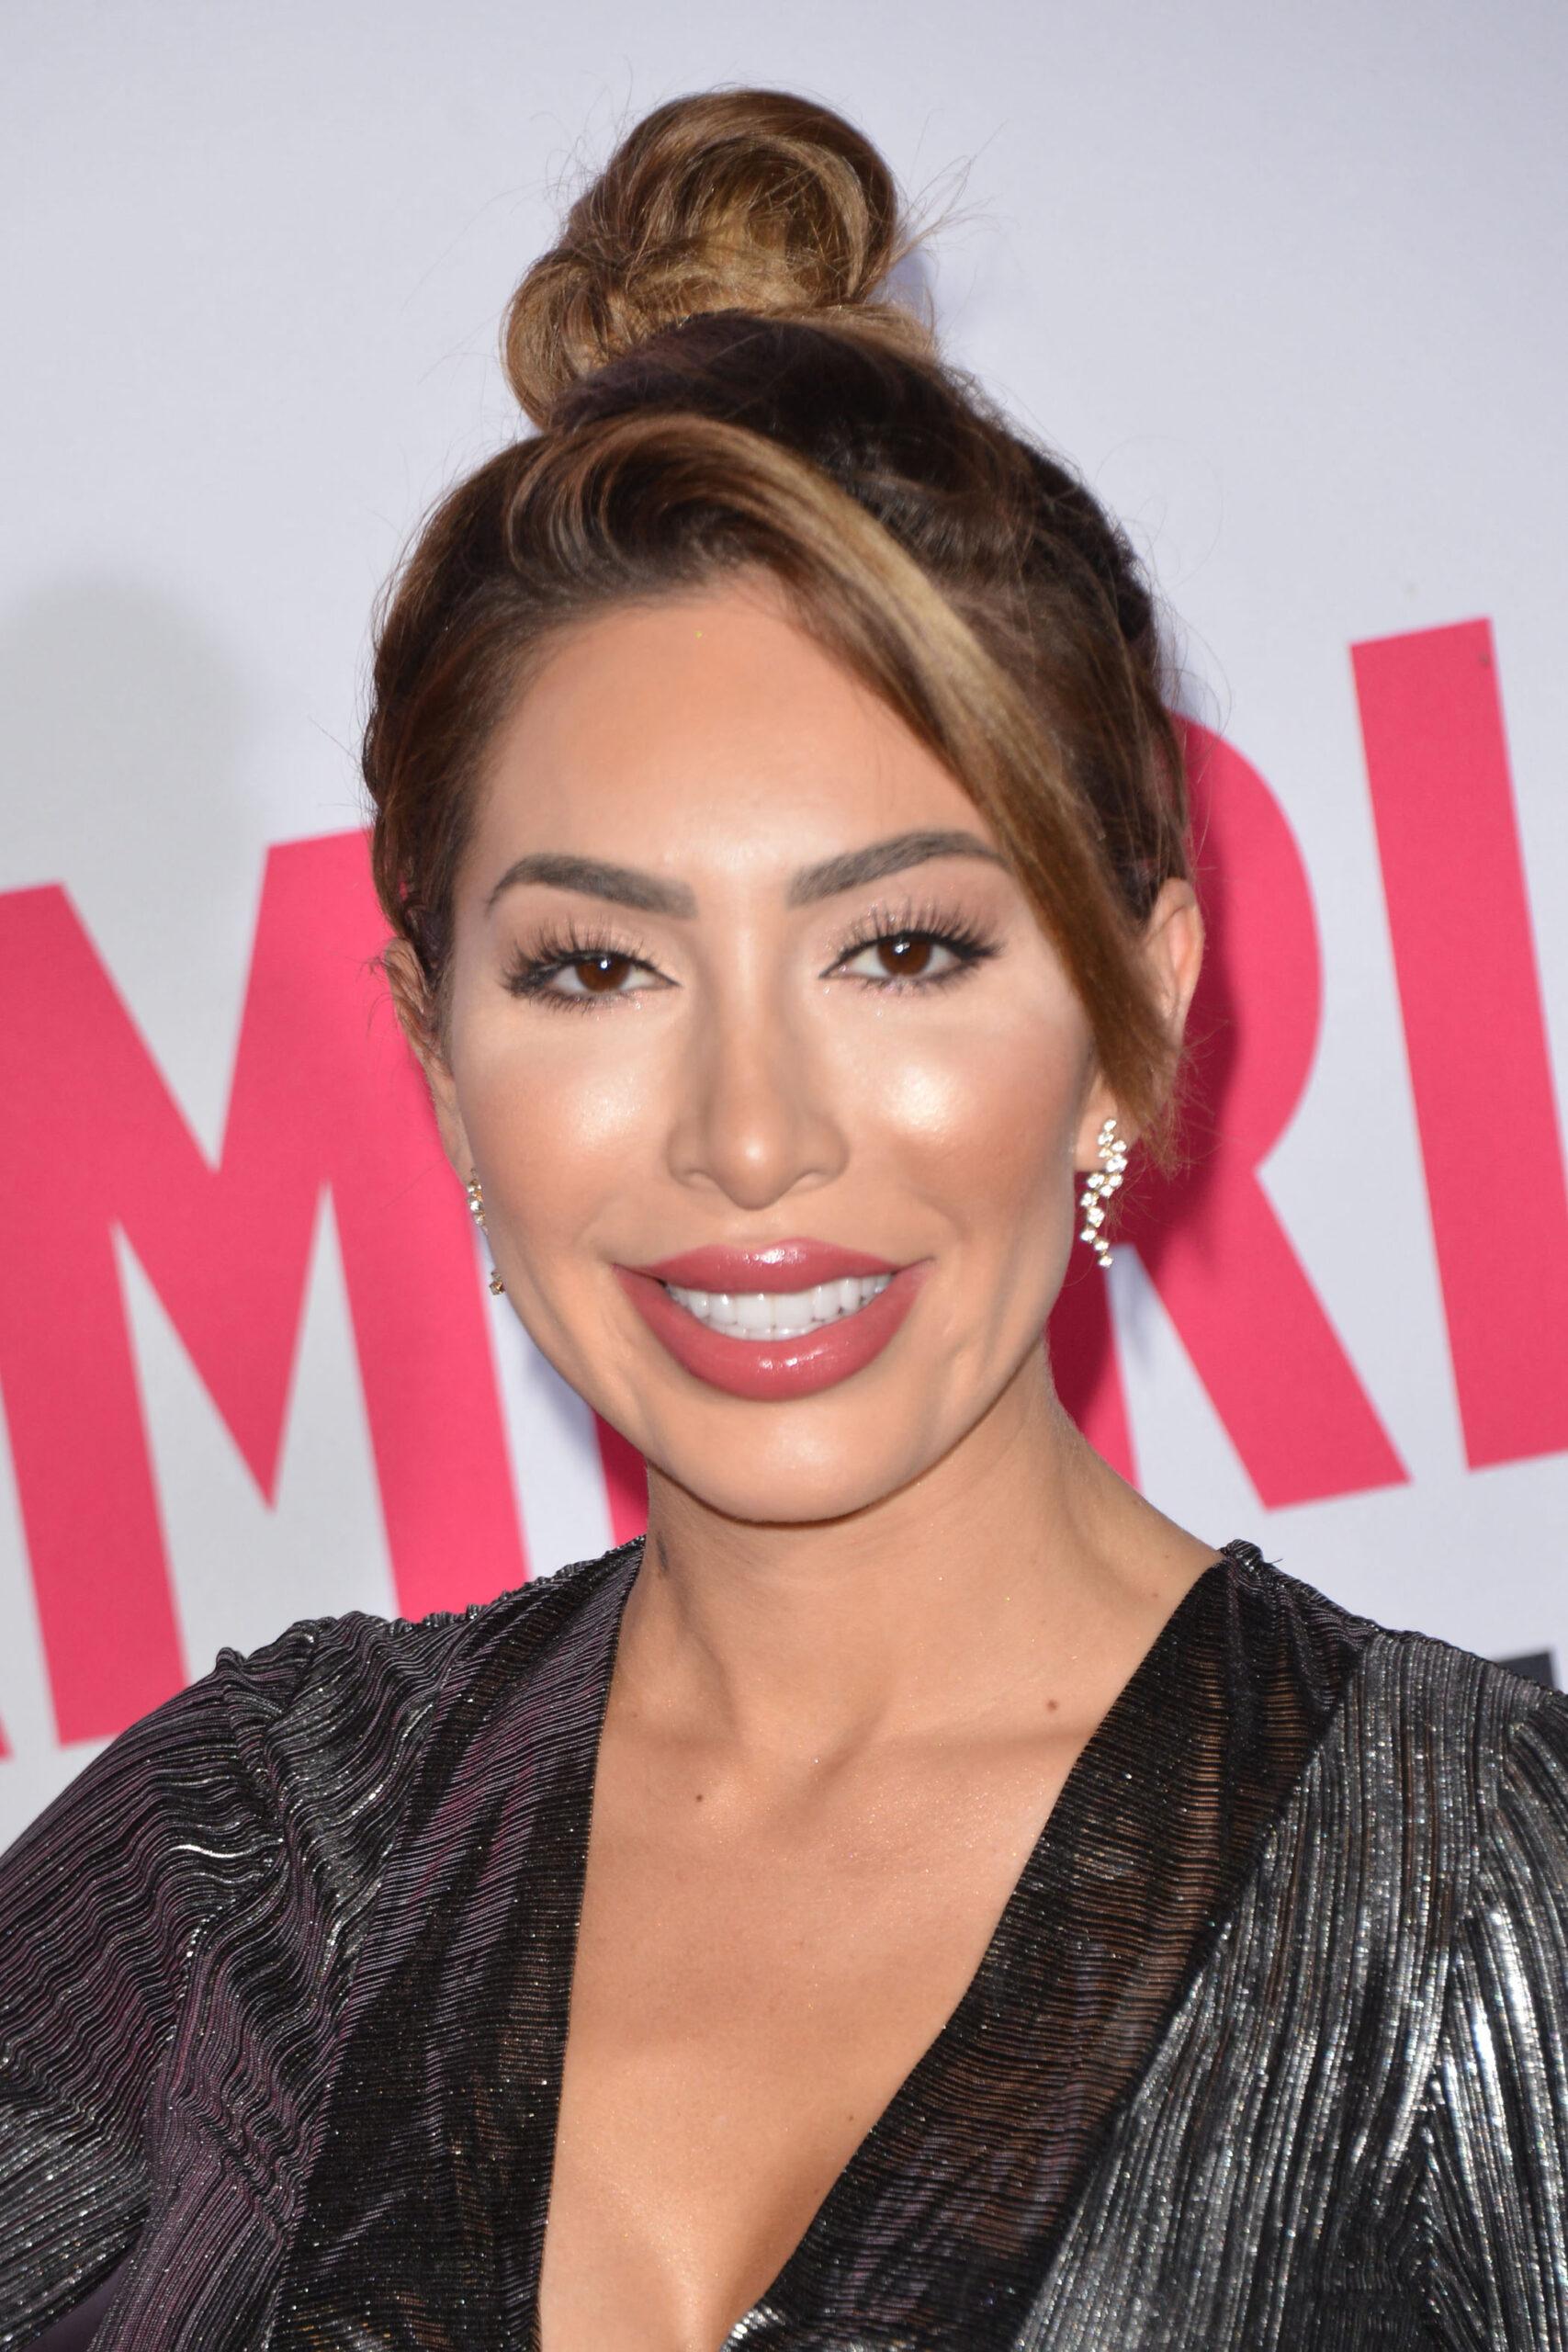 Farrah Abraham attends the 2nd Annual American Influencer Awards